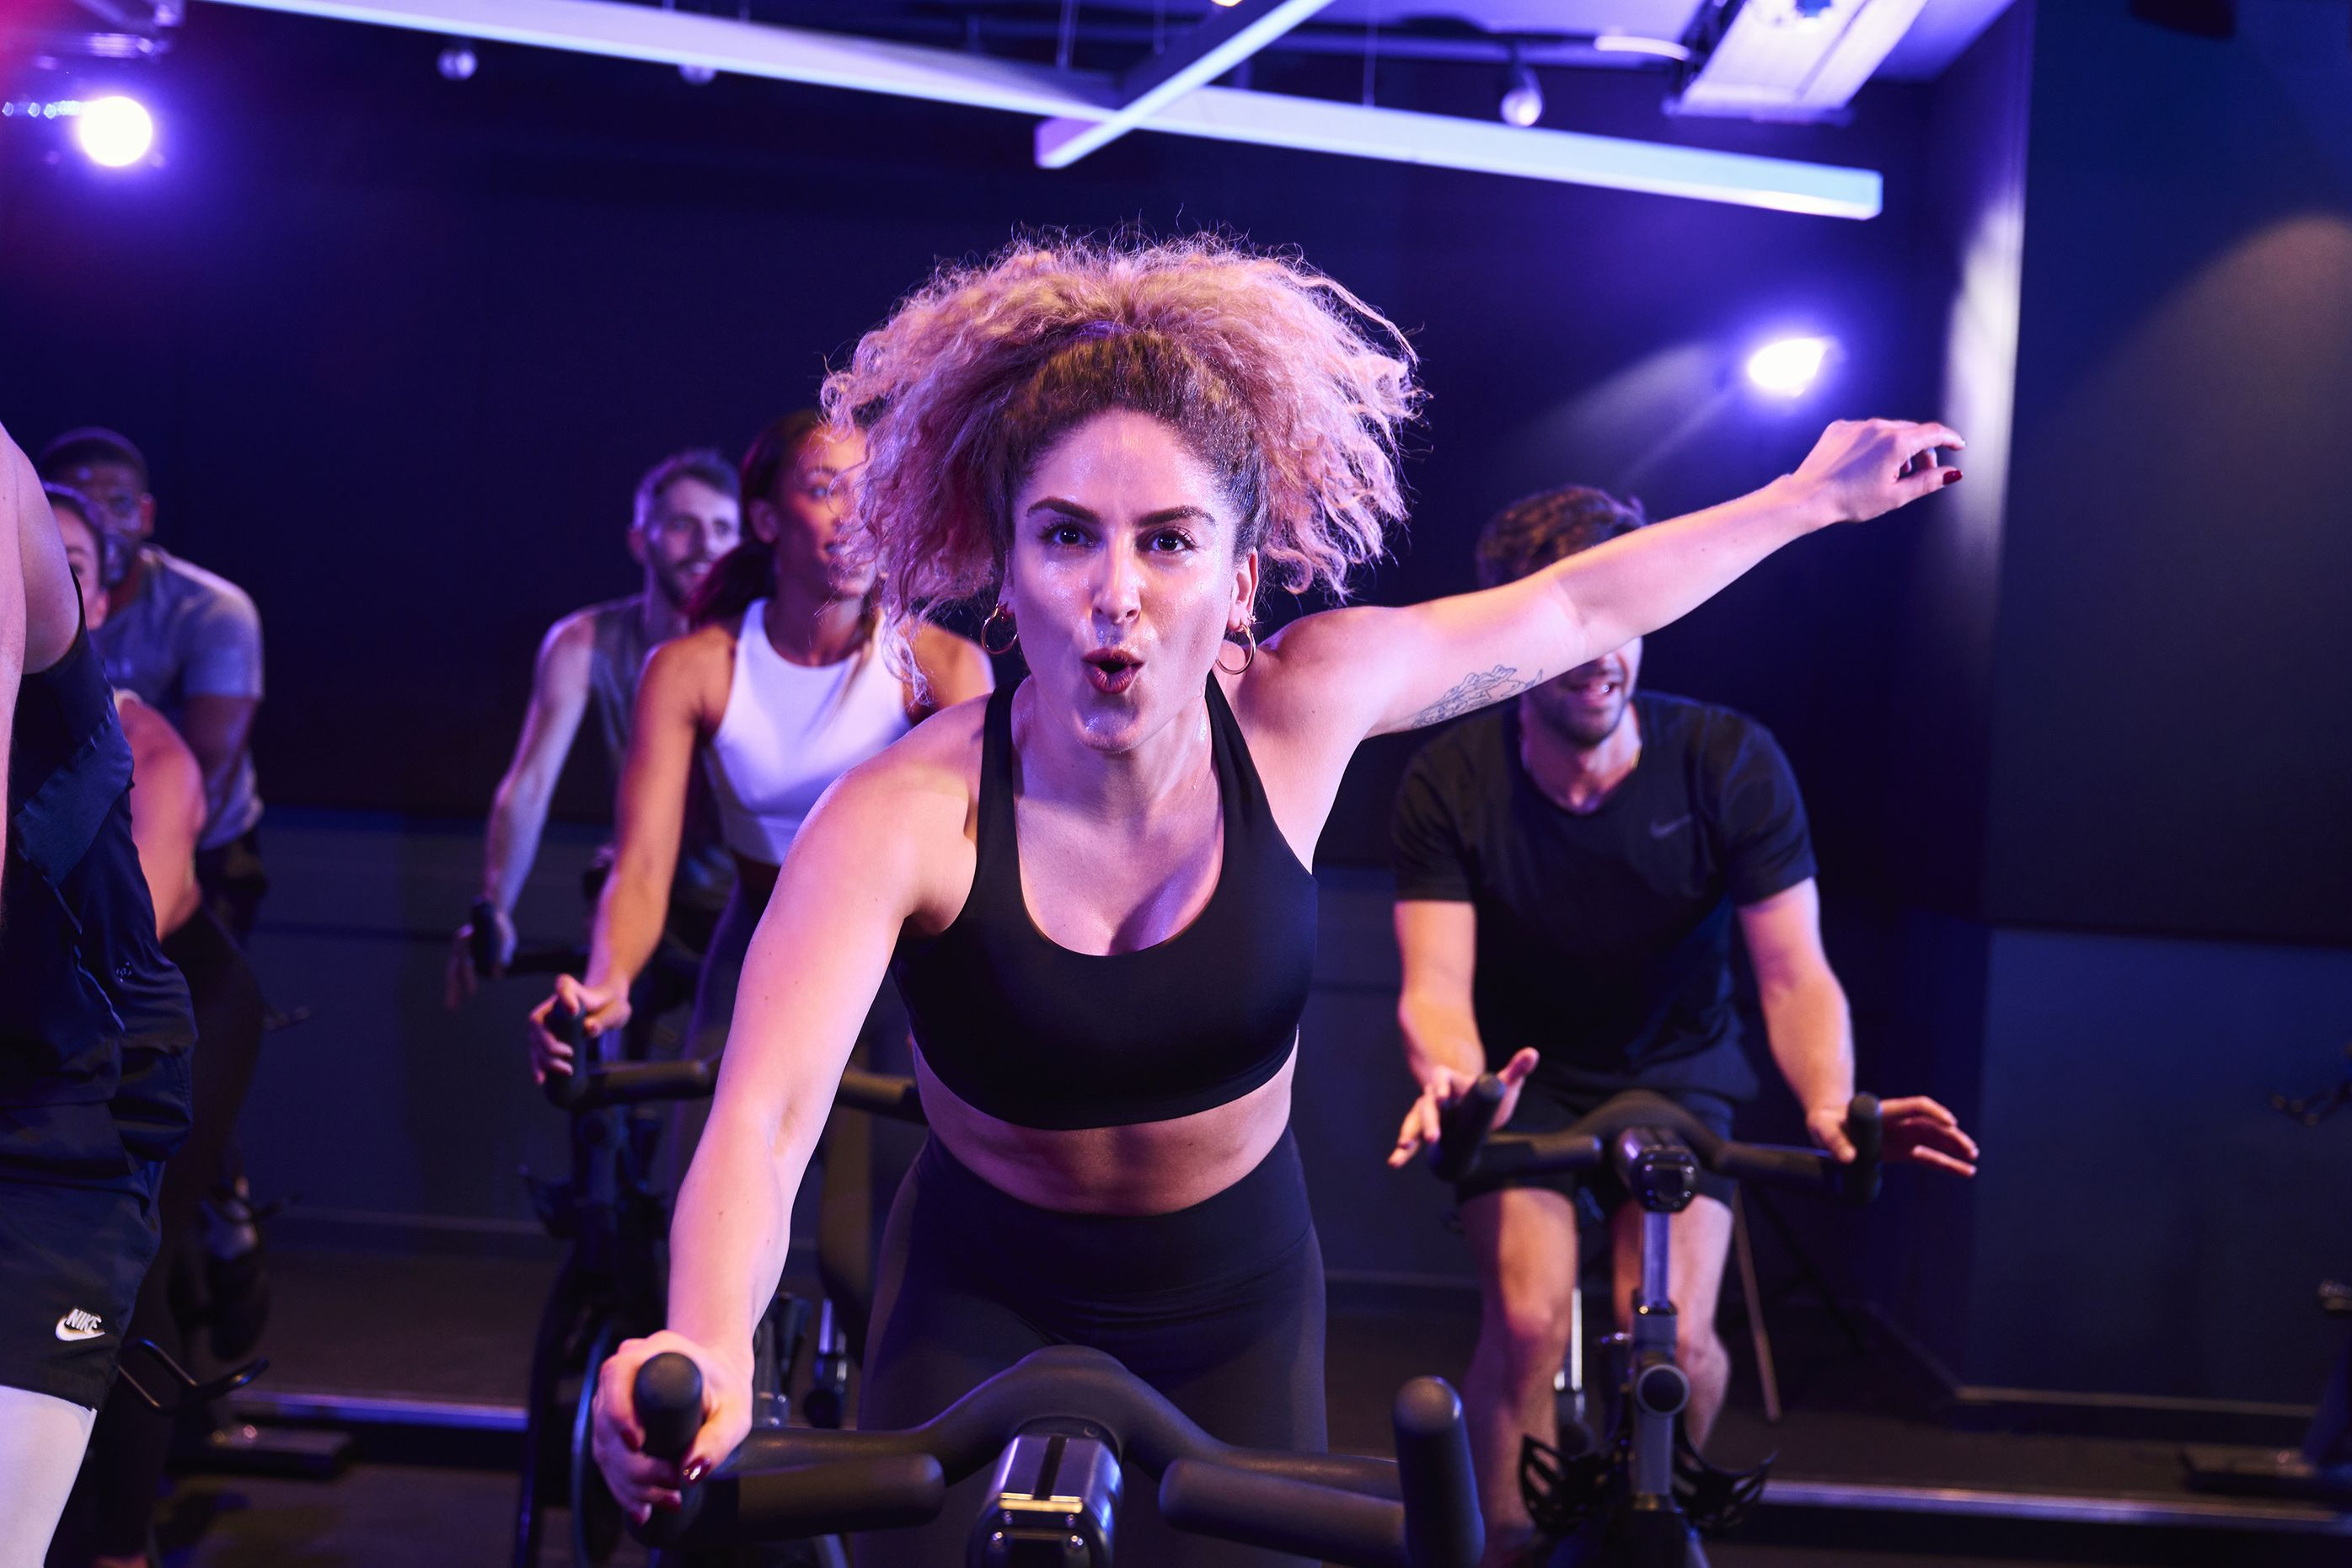 The Benefits of Spin Class for All Fitness Levels